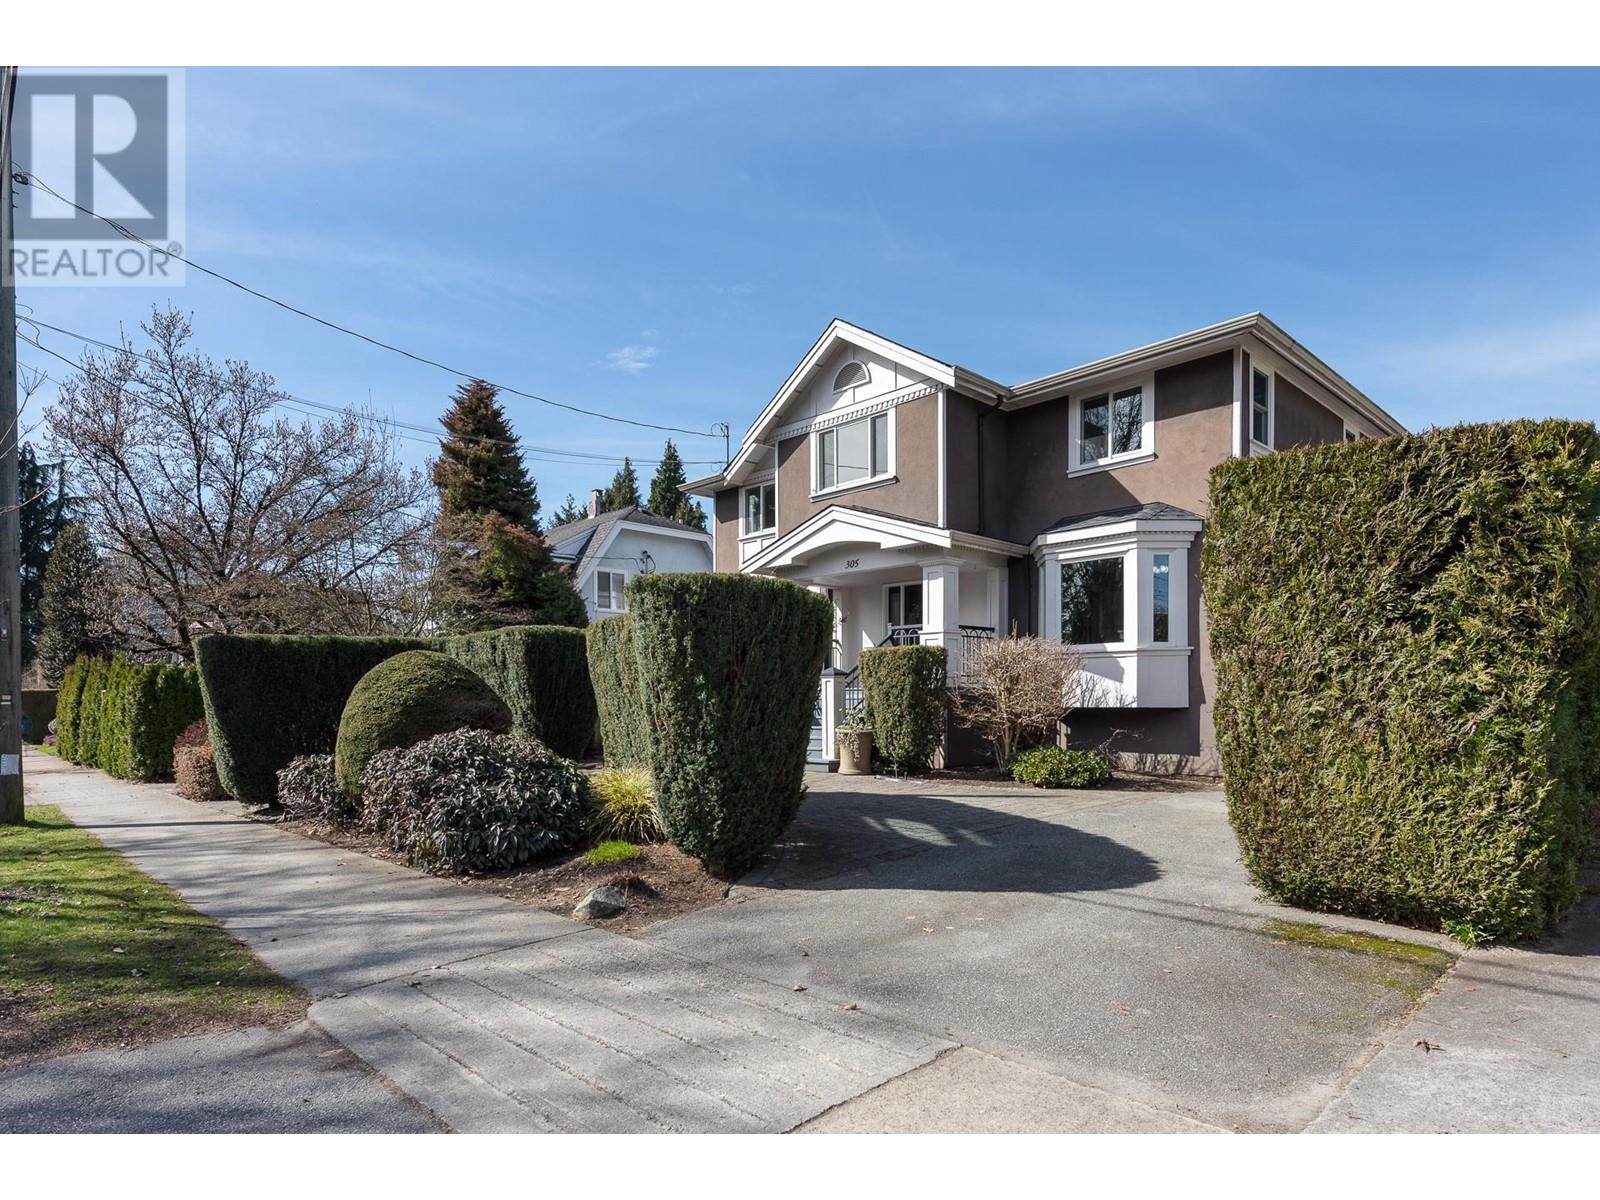 305 SIXTH AVENUE, new westminster, British Columbia